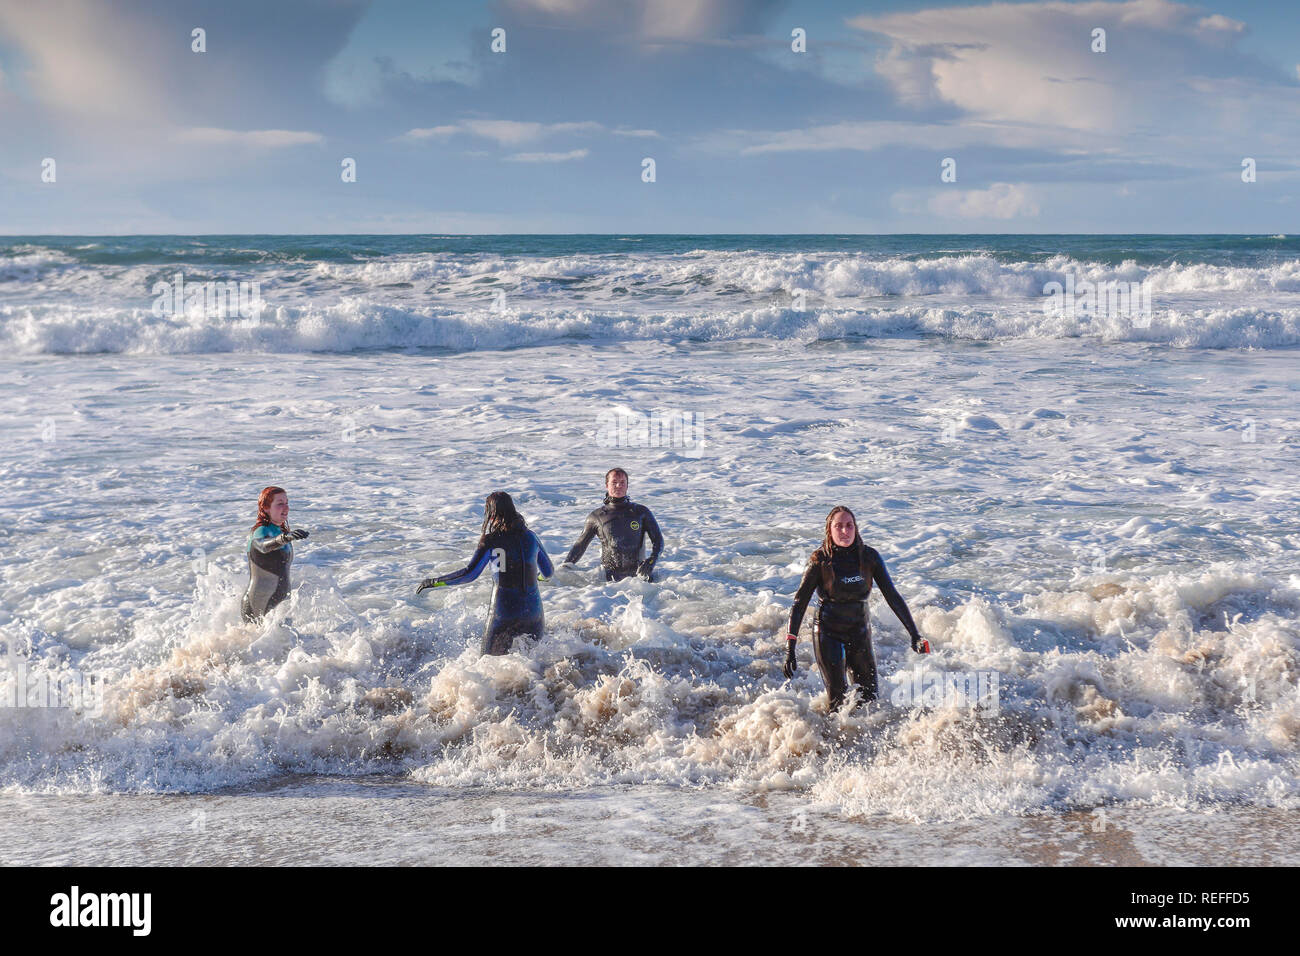 People in wetsuits in the sea at Fistral Beach in Newquay Cornwall. Stock Photo